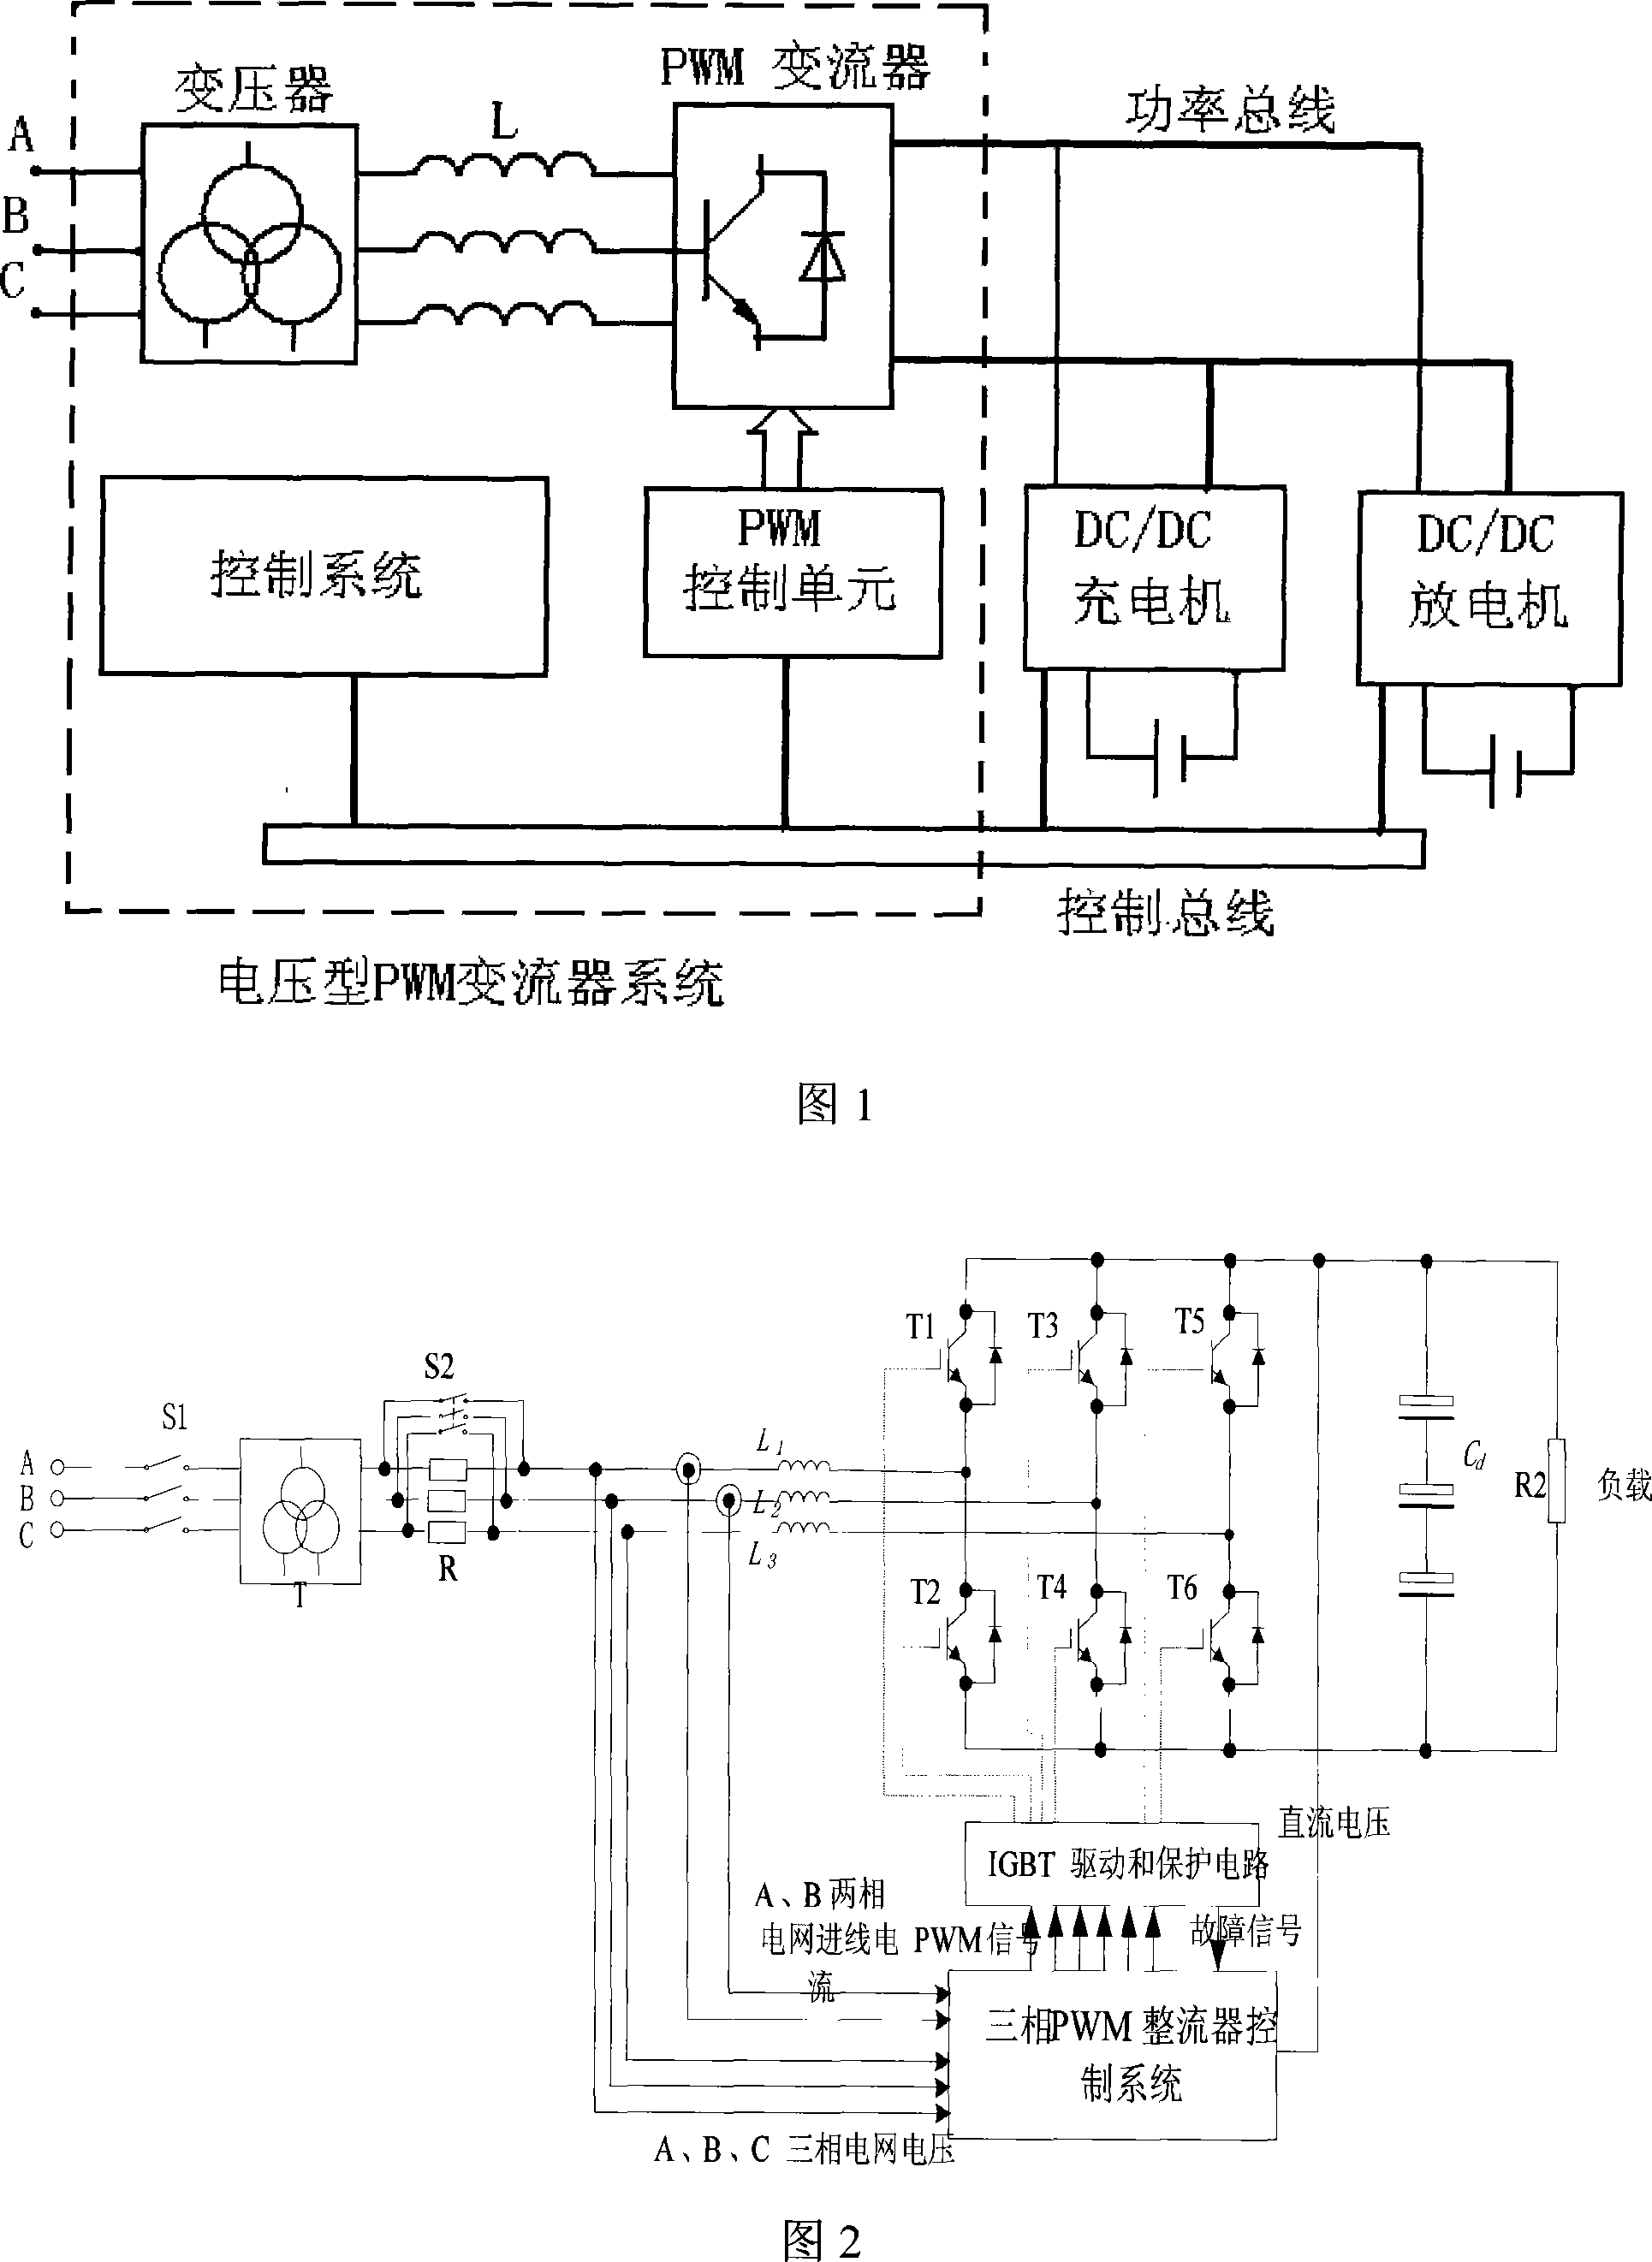 Accumulator multi-unit synchronous charging/discharging device and its method